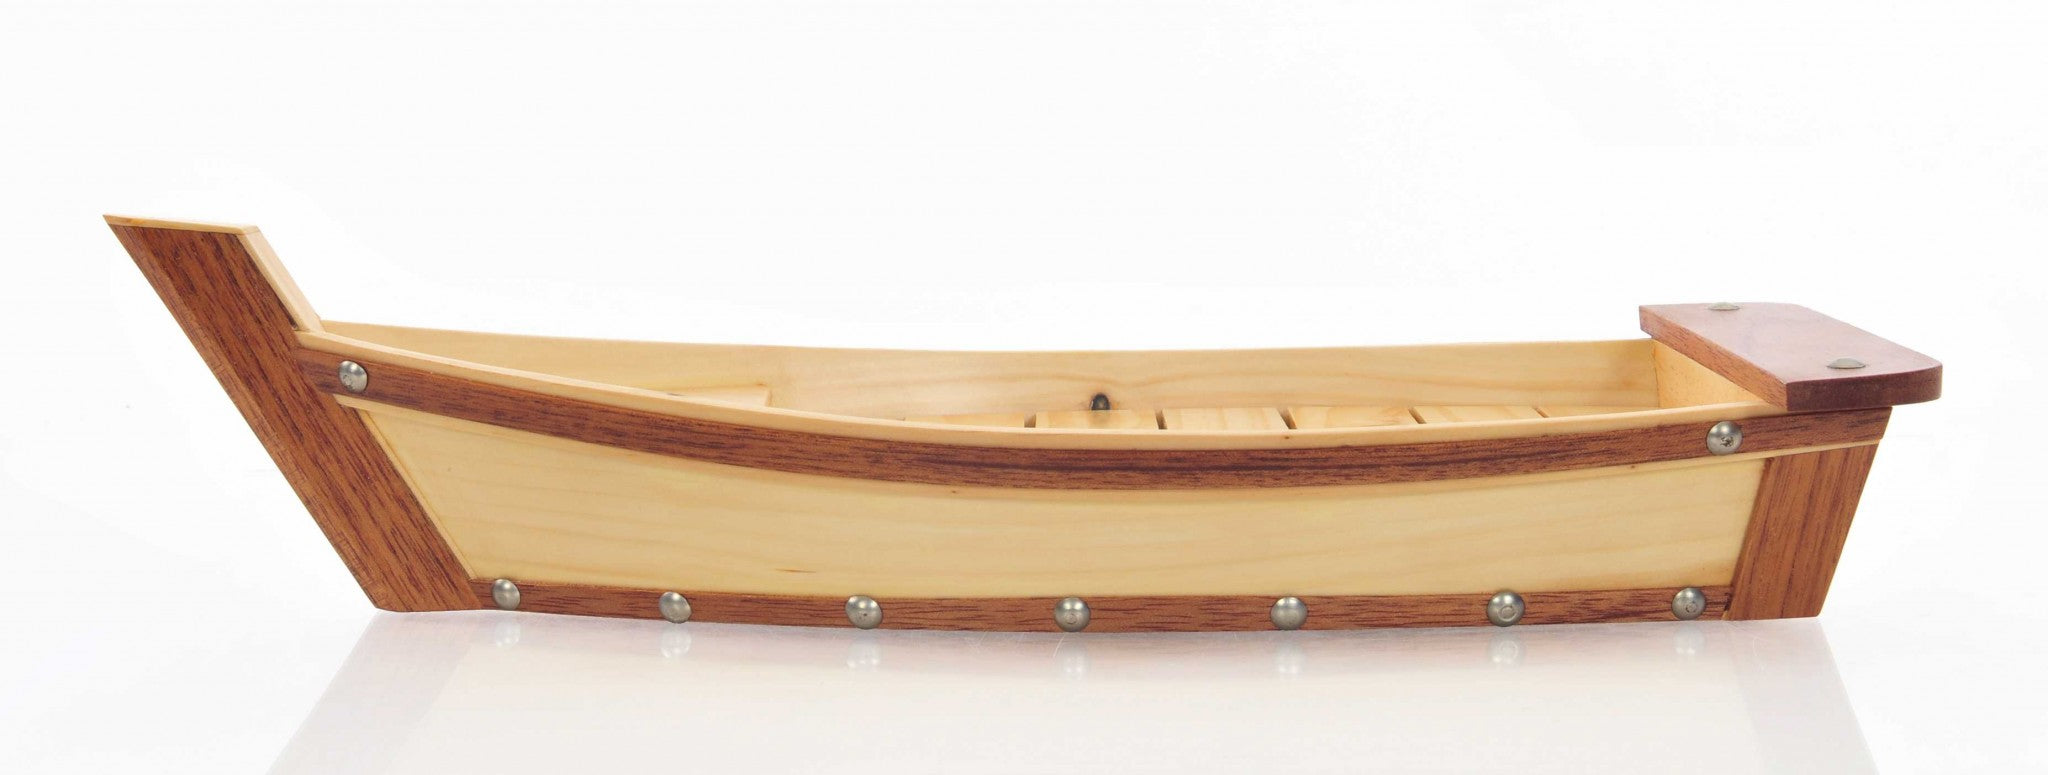 6.25" X 16.75" X 3.37"  Small Wooden Sushi Boat  Serving Tray